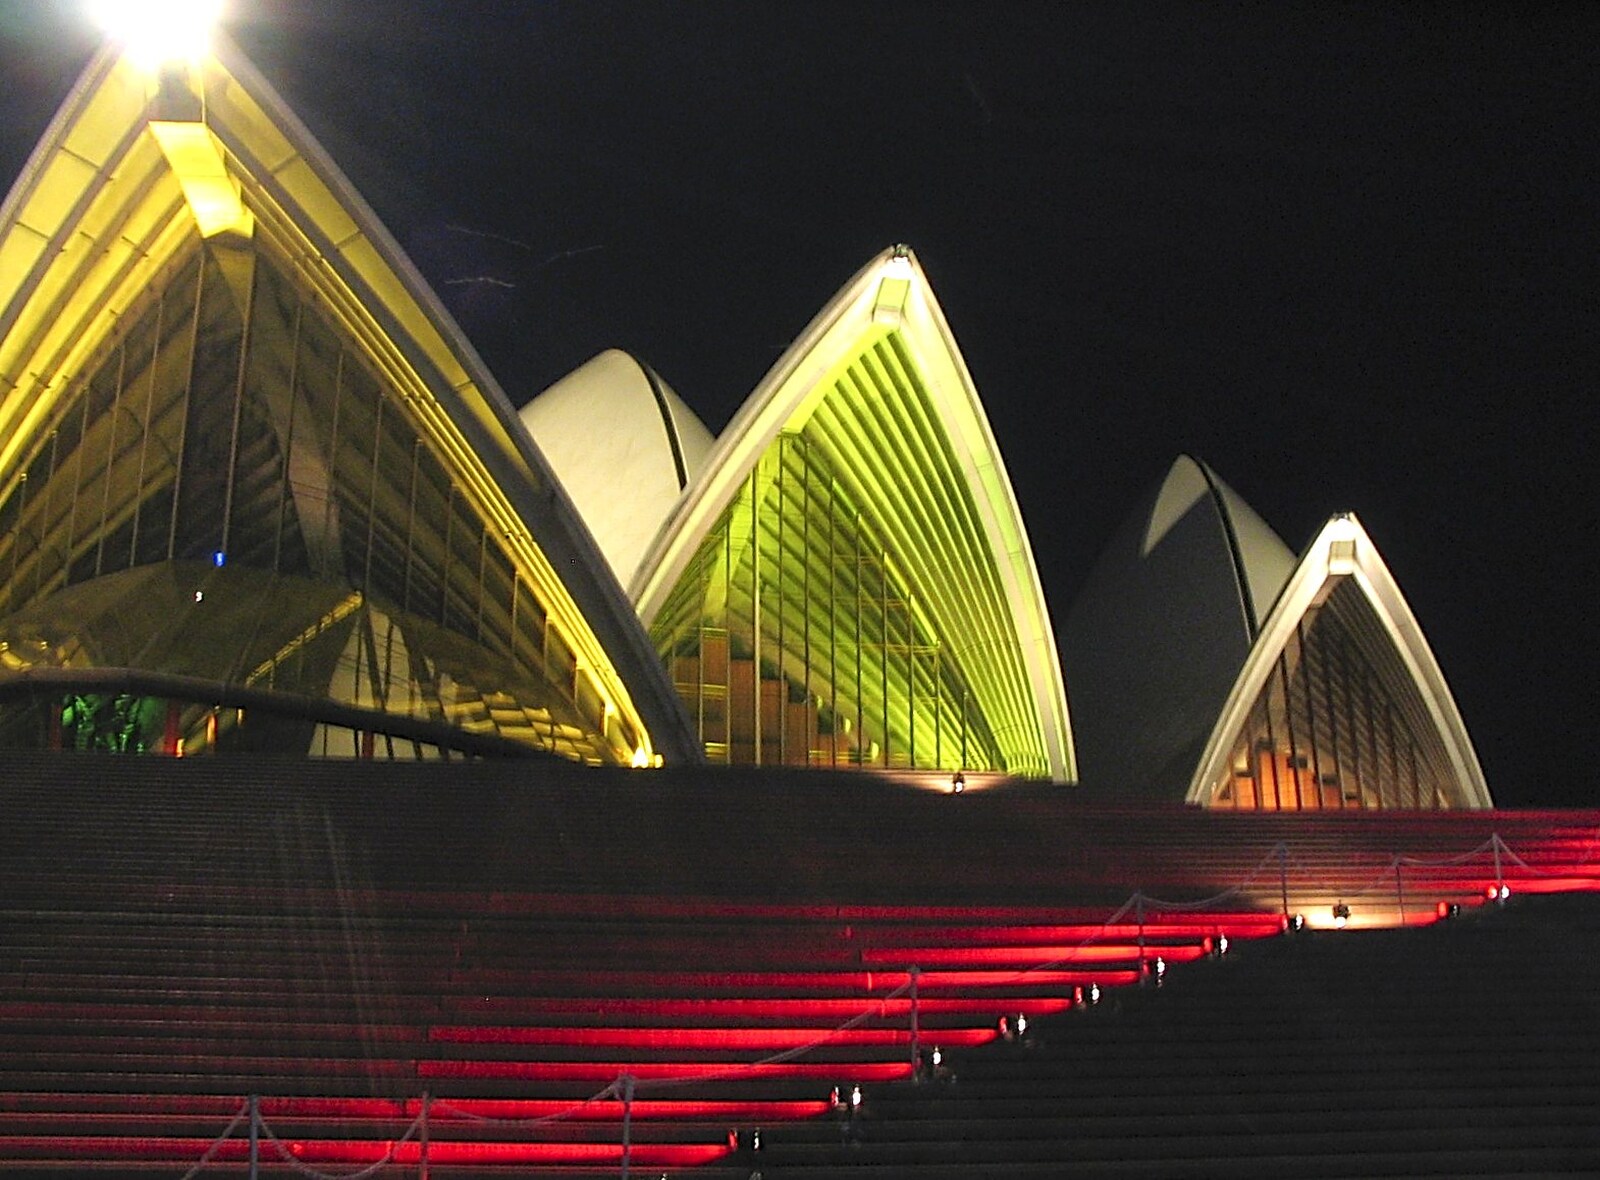 Red steps up to the Opera House from Sydney, New South Wales, Australia - 10th October 2004